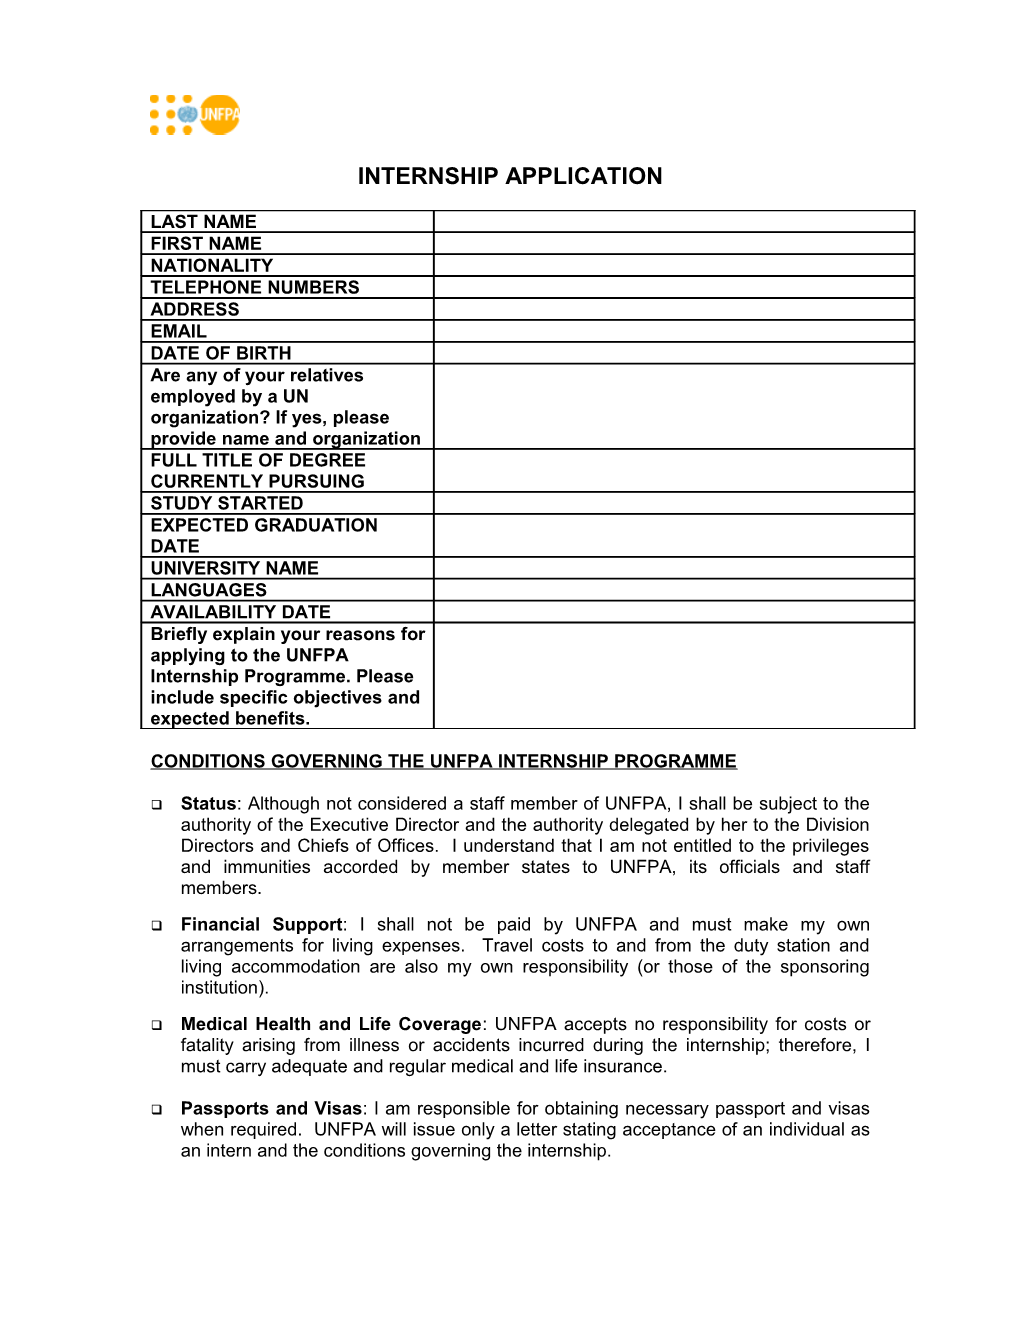 Please Email an Electronic Version of Your P.11 Form with Your Application To